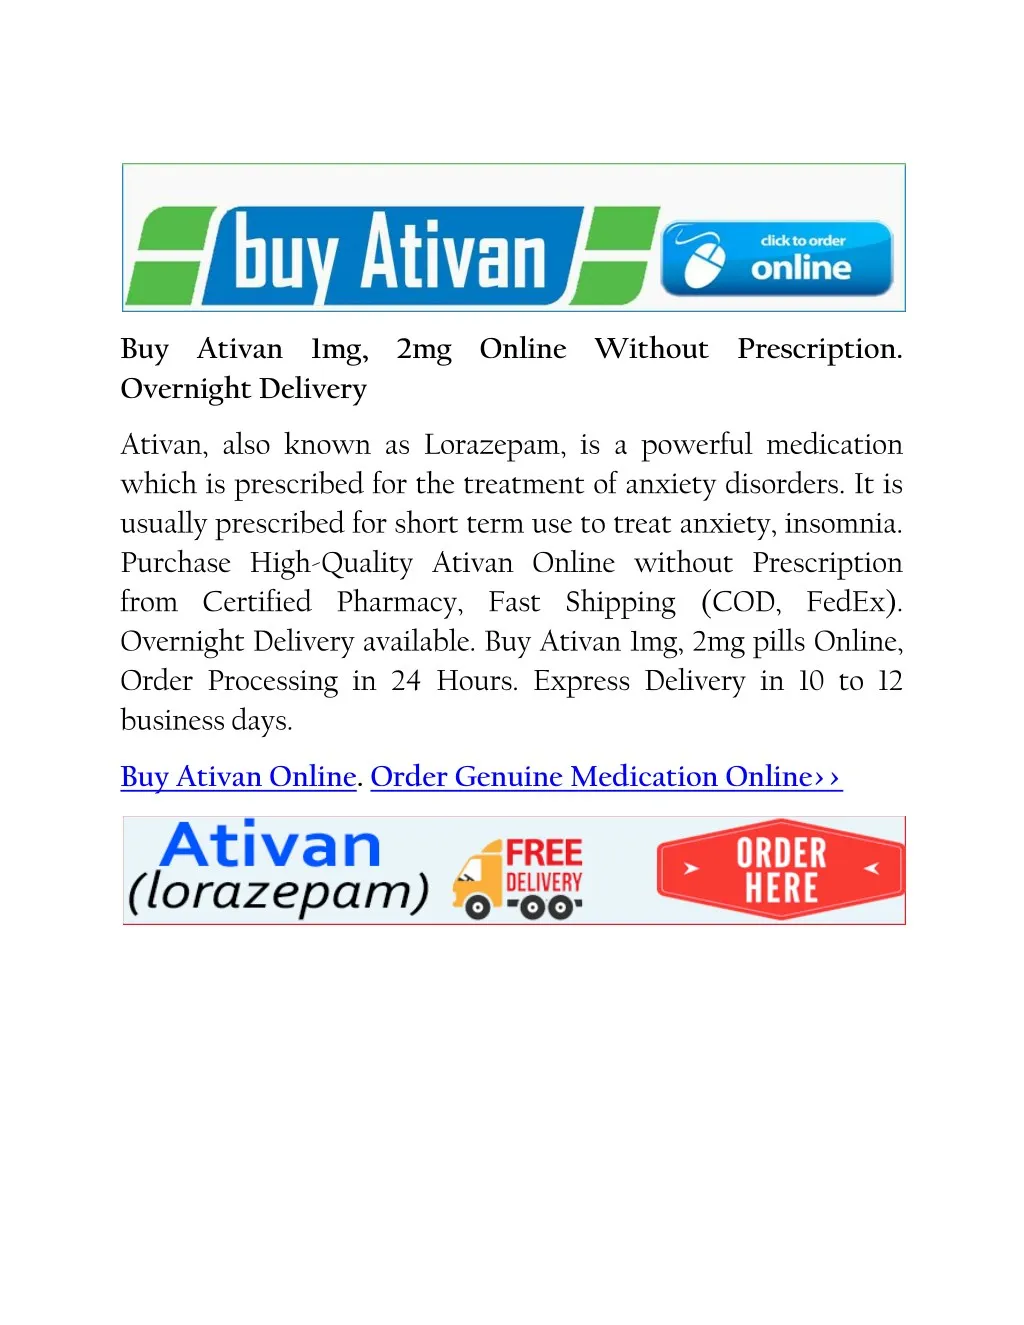 buy ativan 1mg 2mg online without prescription